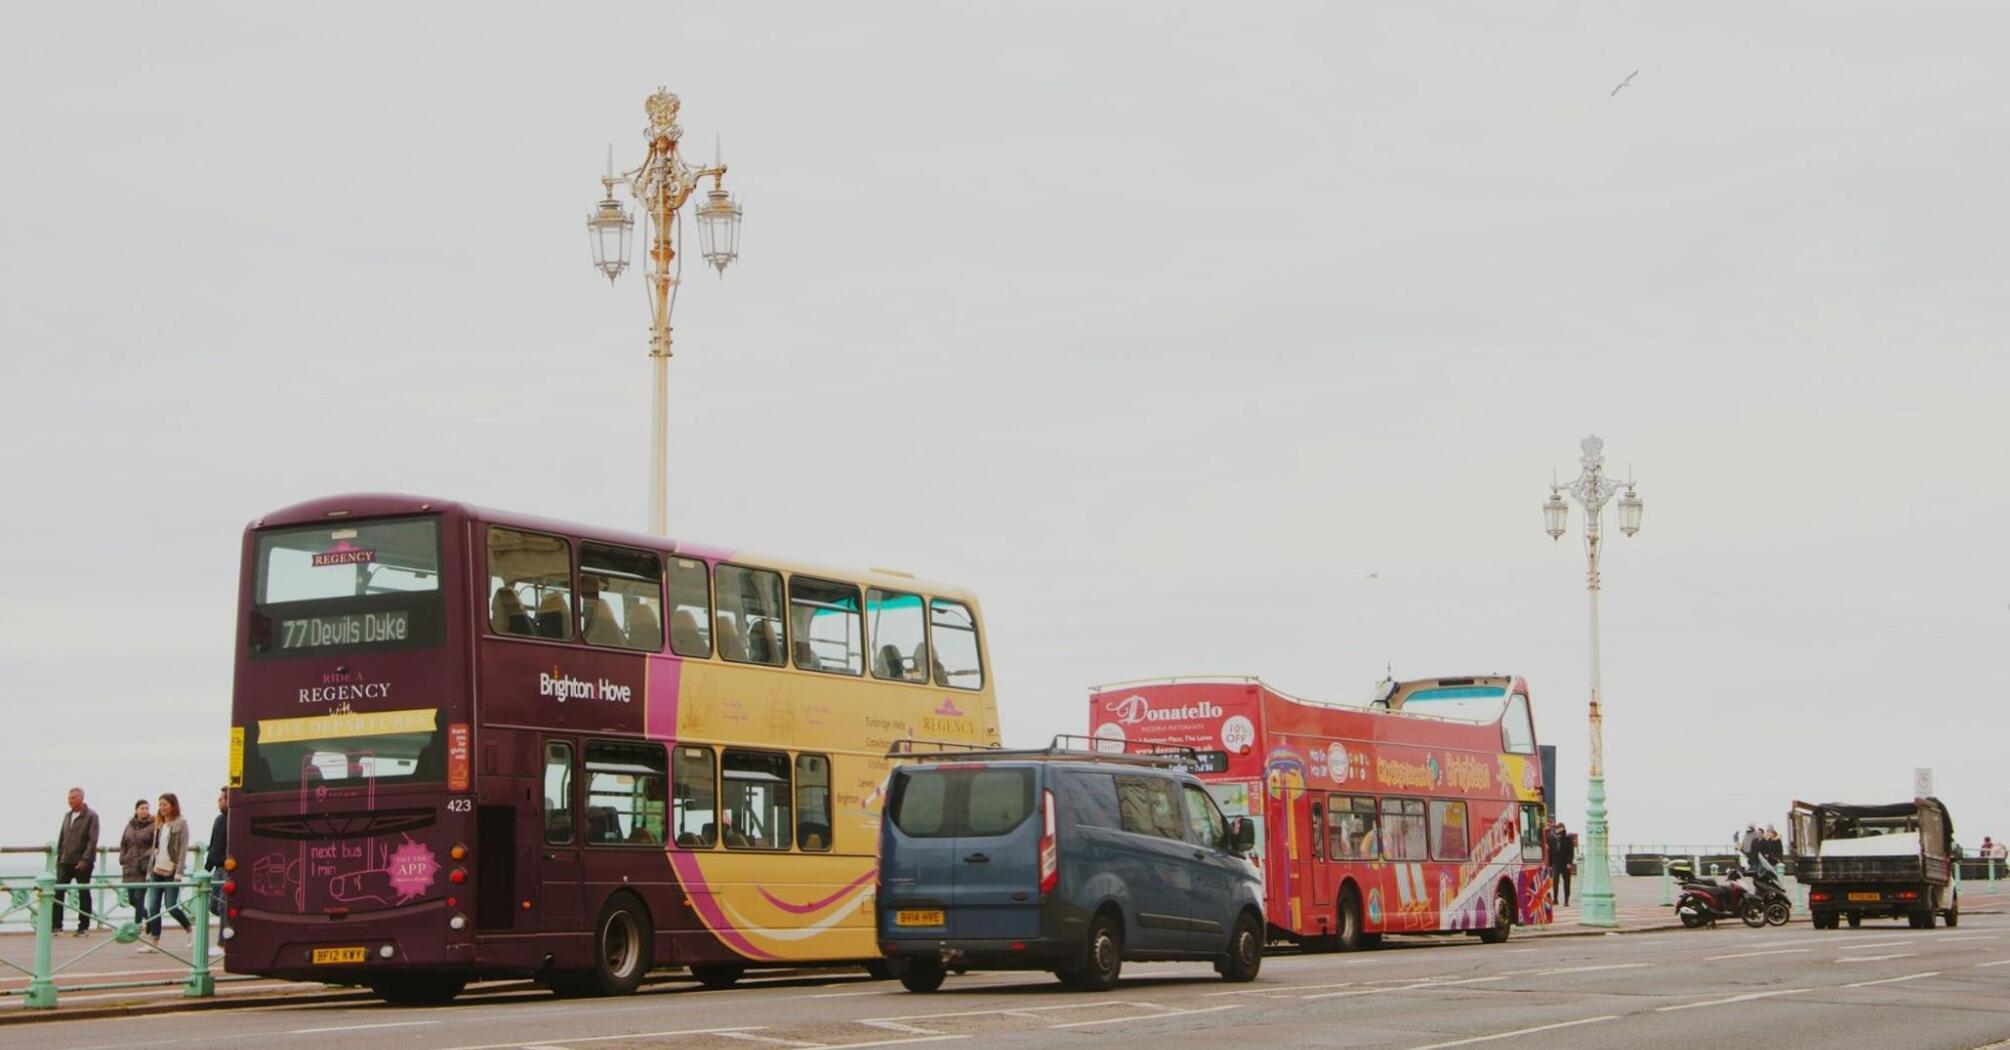 Brighton & Hove buses parked along a street near the seaside